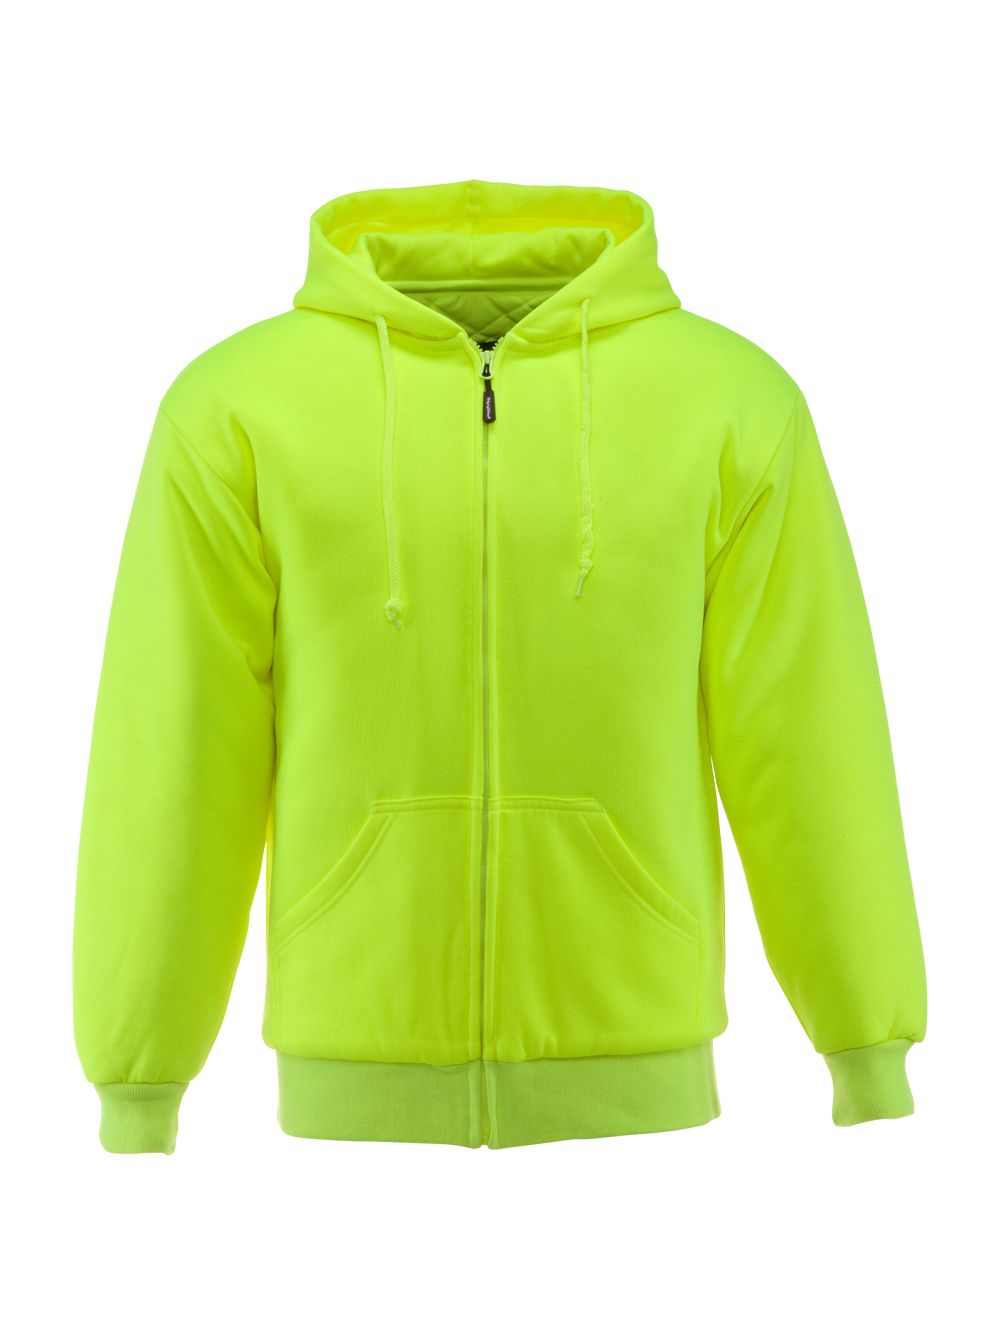 RefrigiWear HiVis Insulated Quilted Sweatshirt | Lime | Fit: Big & Tall | Ragg Wool/Polyester/Fabric | S